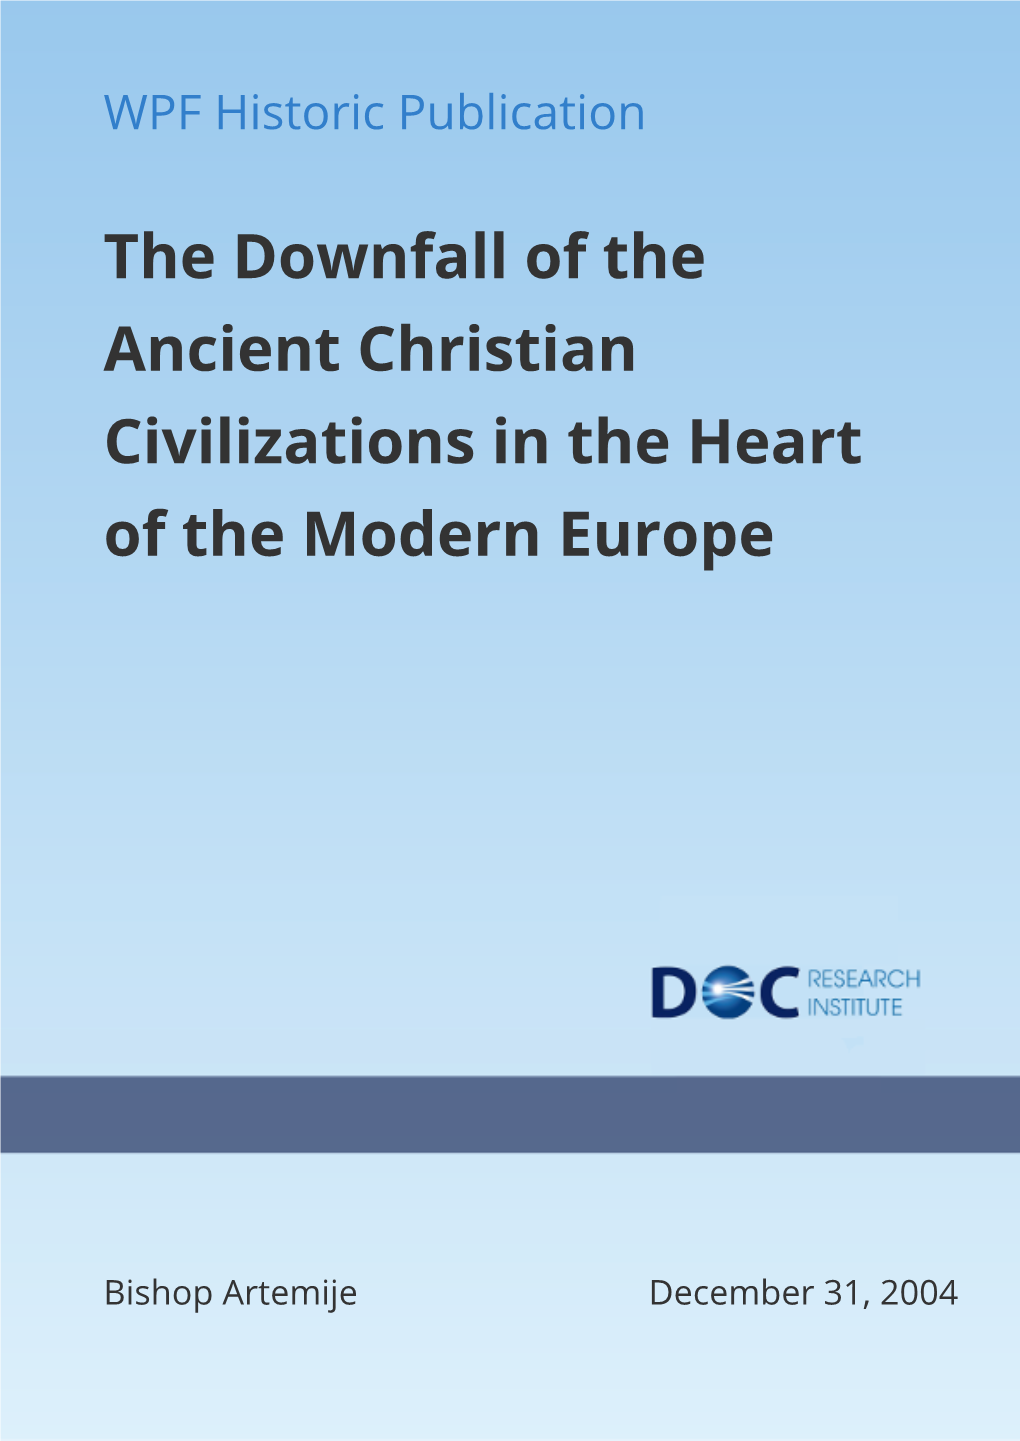 The Downfall of the Ancient Christian Civilizations in the Heart of the Modern Europe